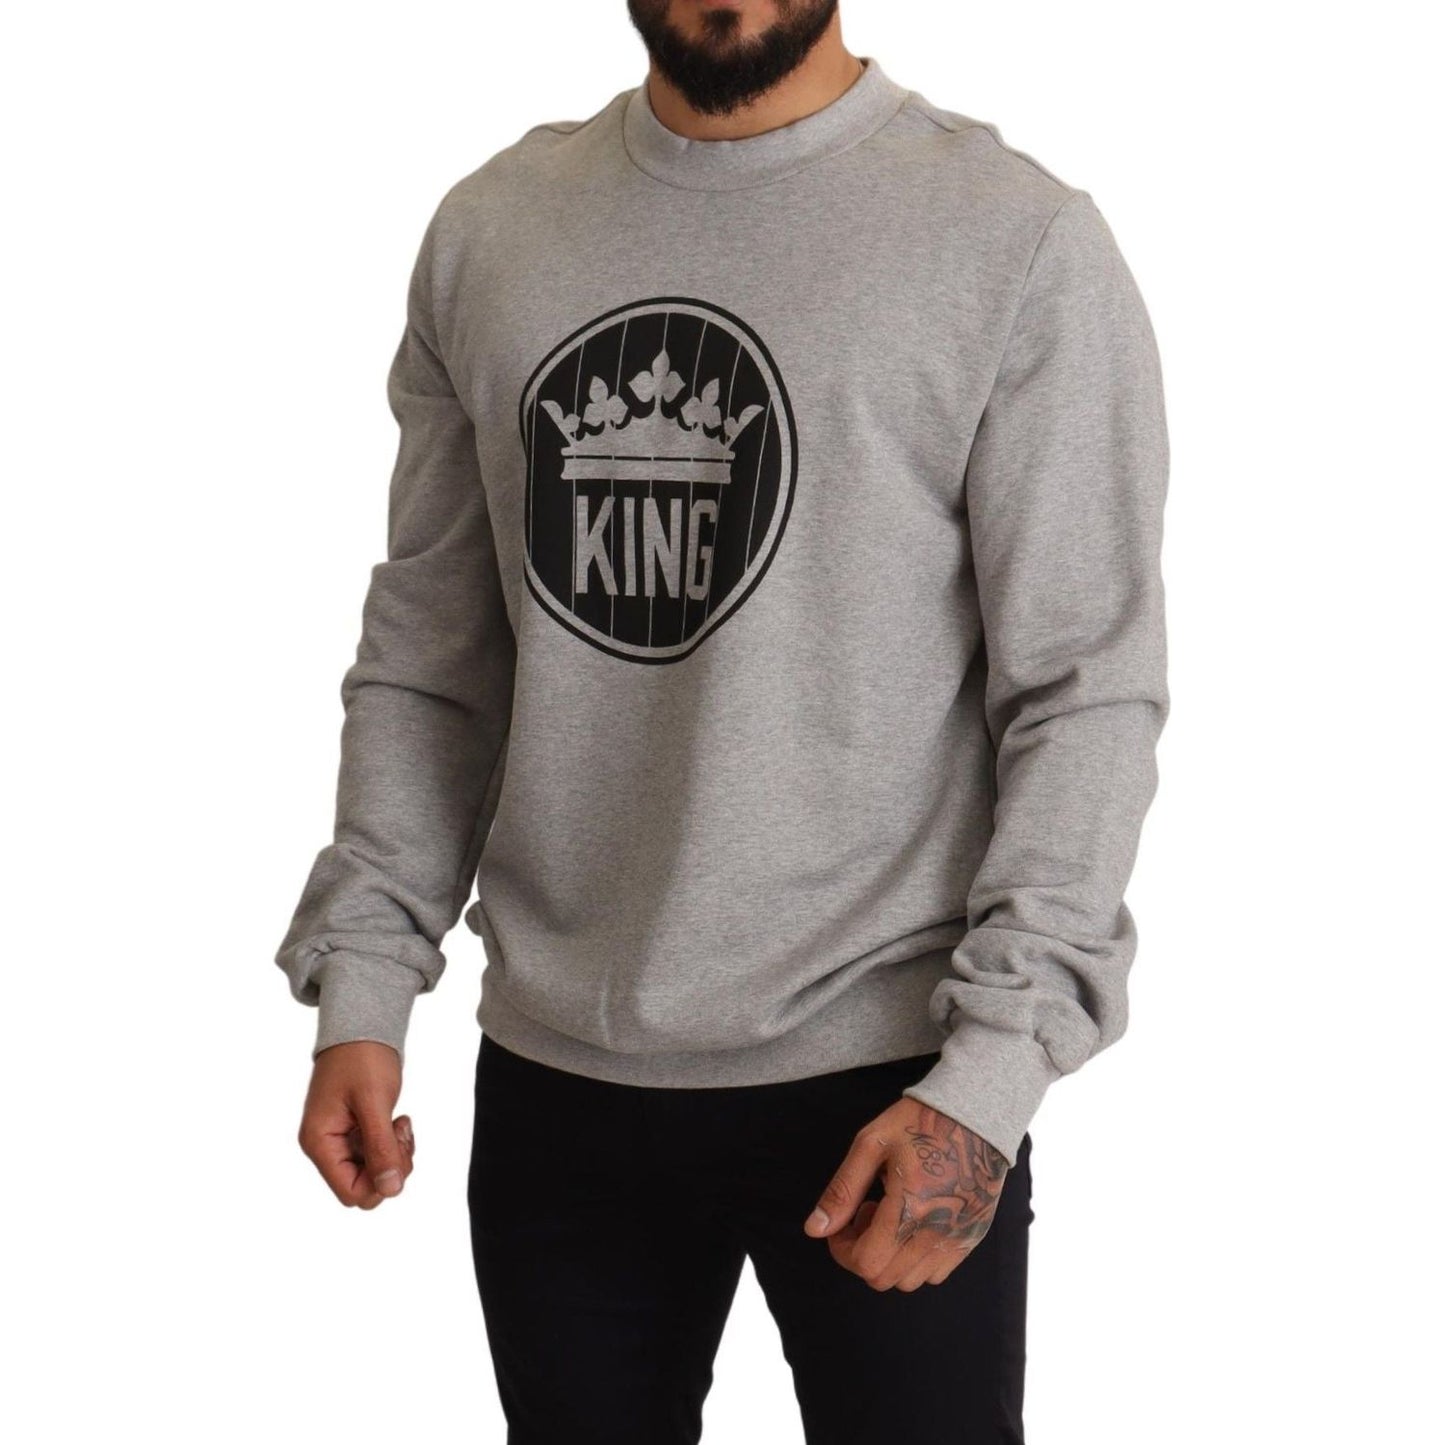 Dolce & Gabbana Regal Crown Cotton Sweater - Sophisticated Gray MAN SWEATERS gray-crown-king-print-cotton-sweater